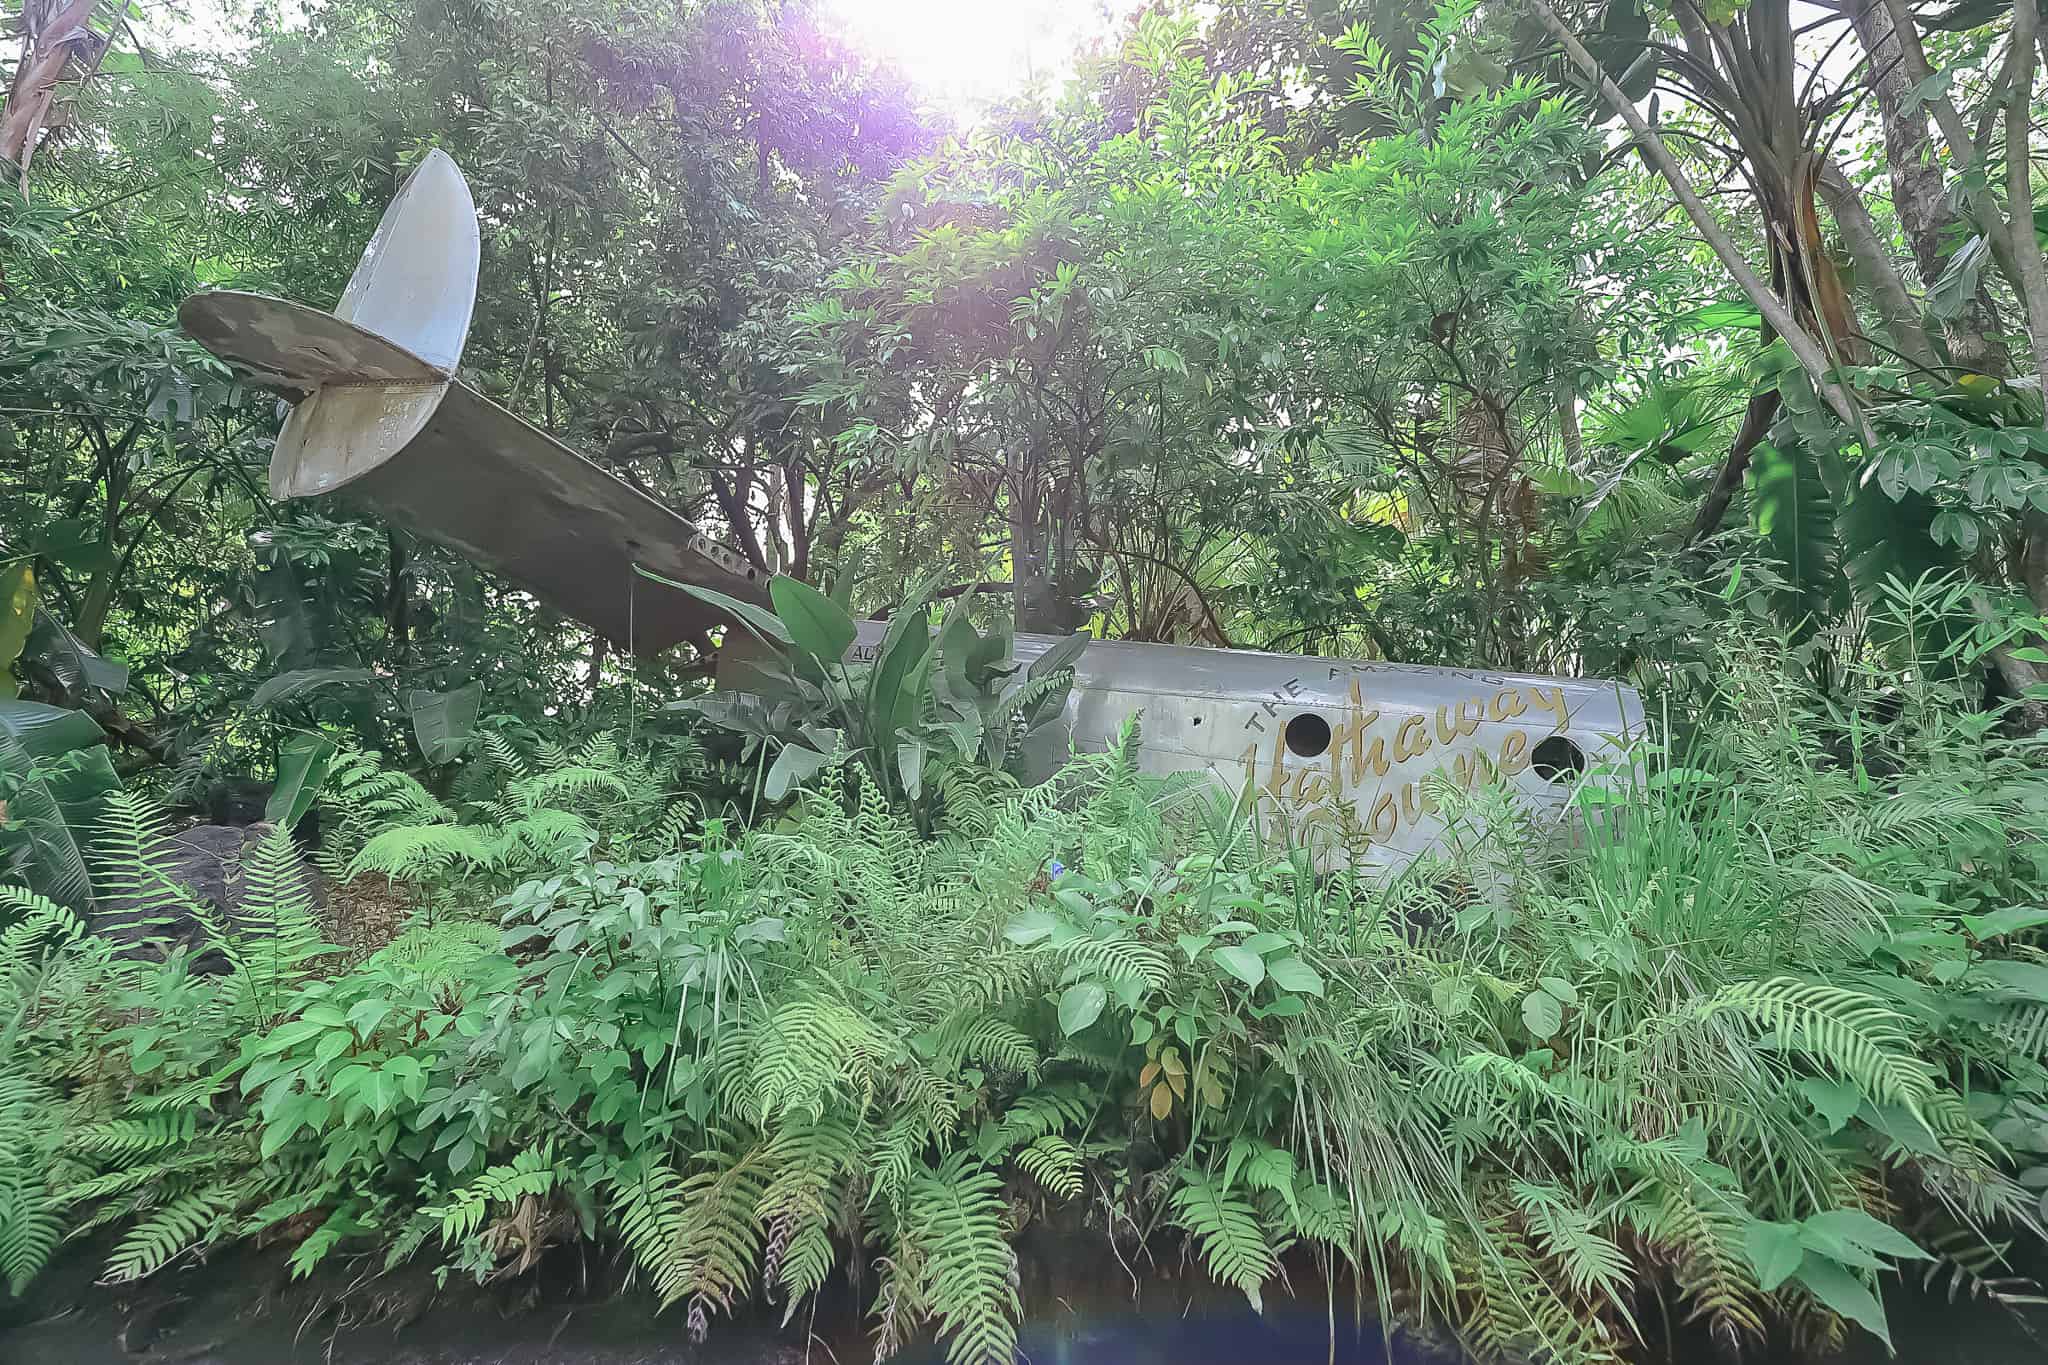 the remains of a plane that crashed in the jungle 